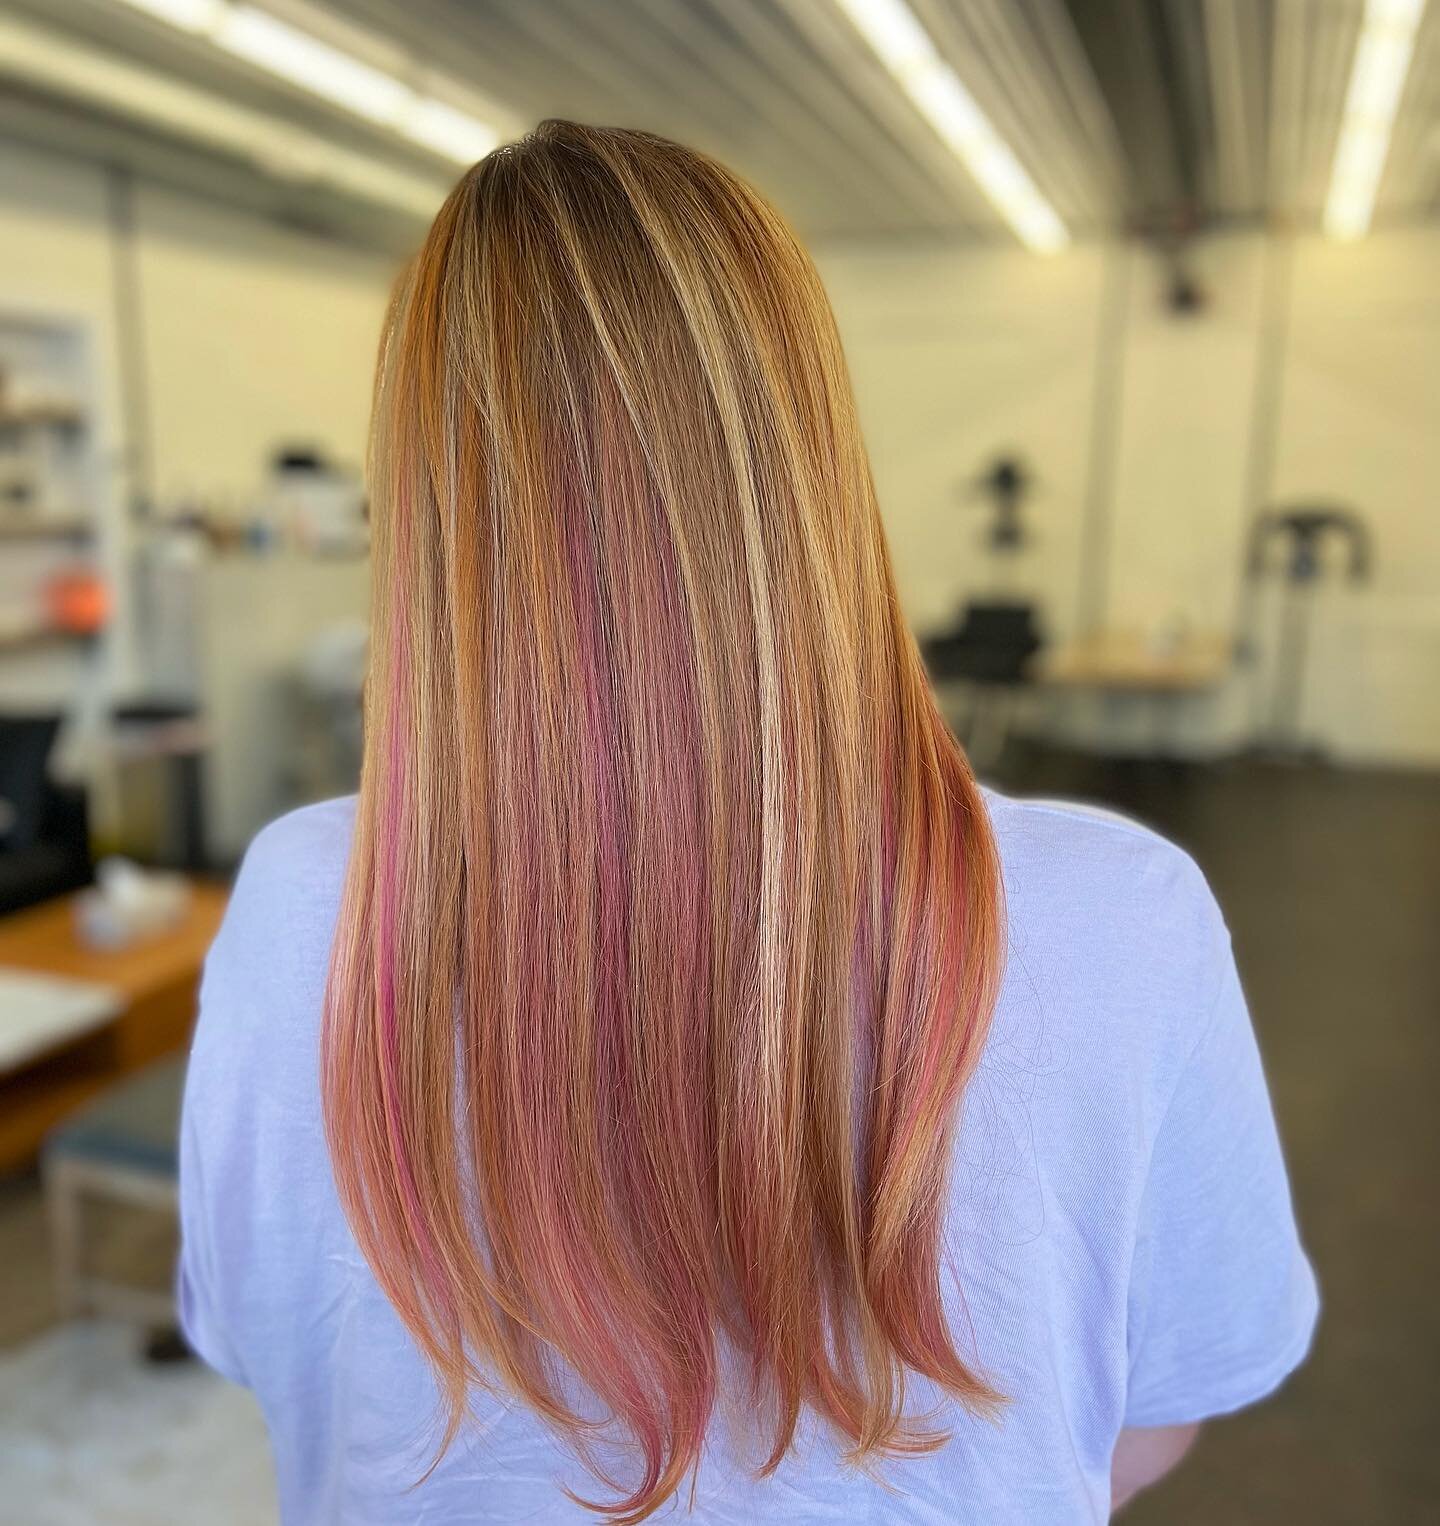 Pops of fun 🍭 

Hand painted signature colors on @jgarrison24 by @heatherschair to preserve her beautiful natural base &amp; have a little fun. 

#balayage #signaturecolor #wella #pulpriot #mce #mastercolorist #mastercolorexpert #hhouseofhair #annvi